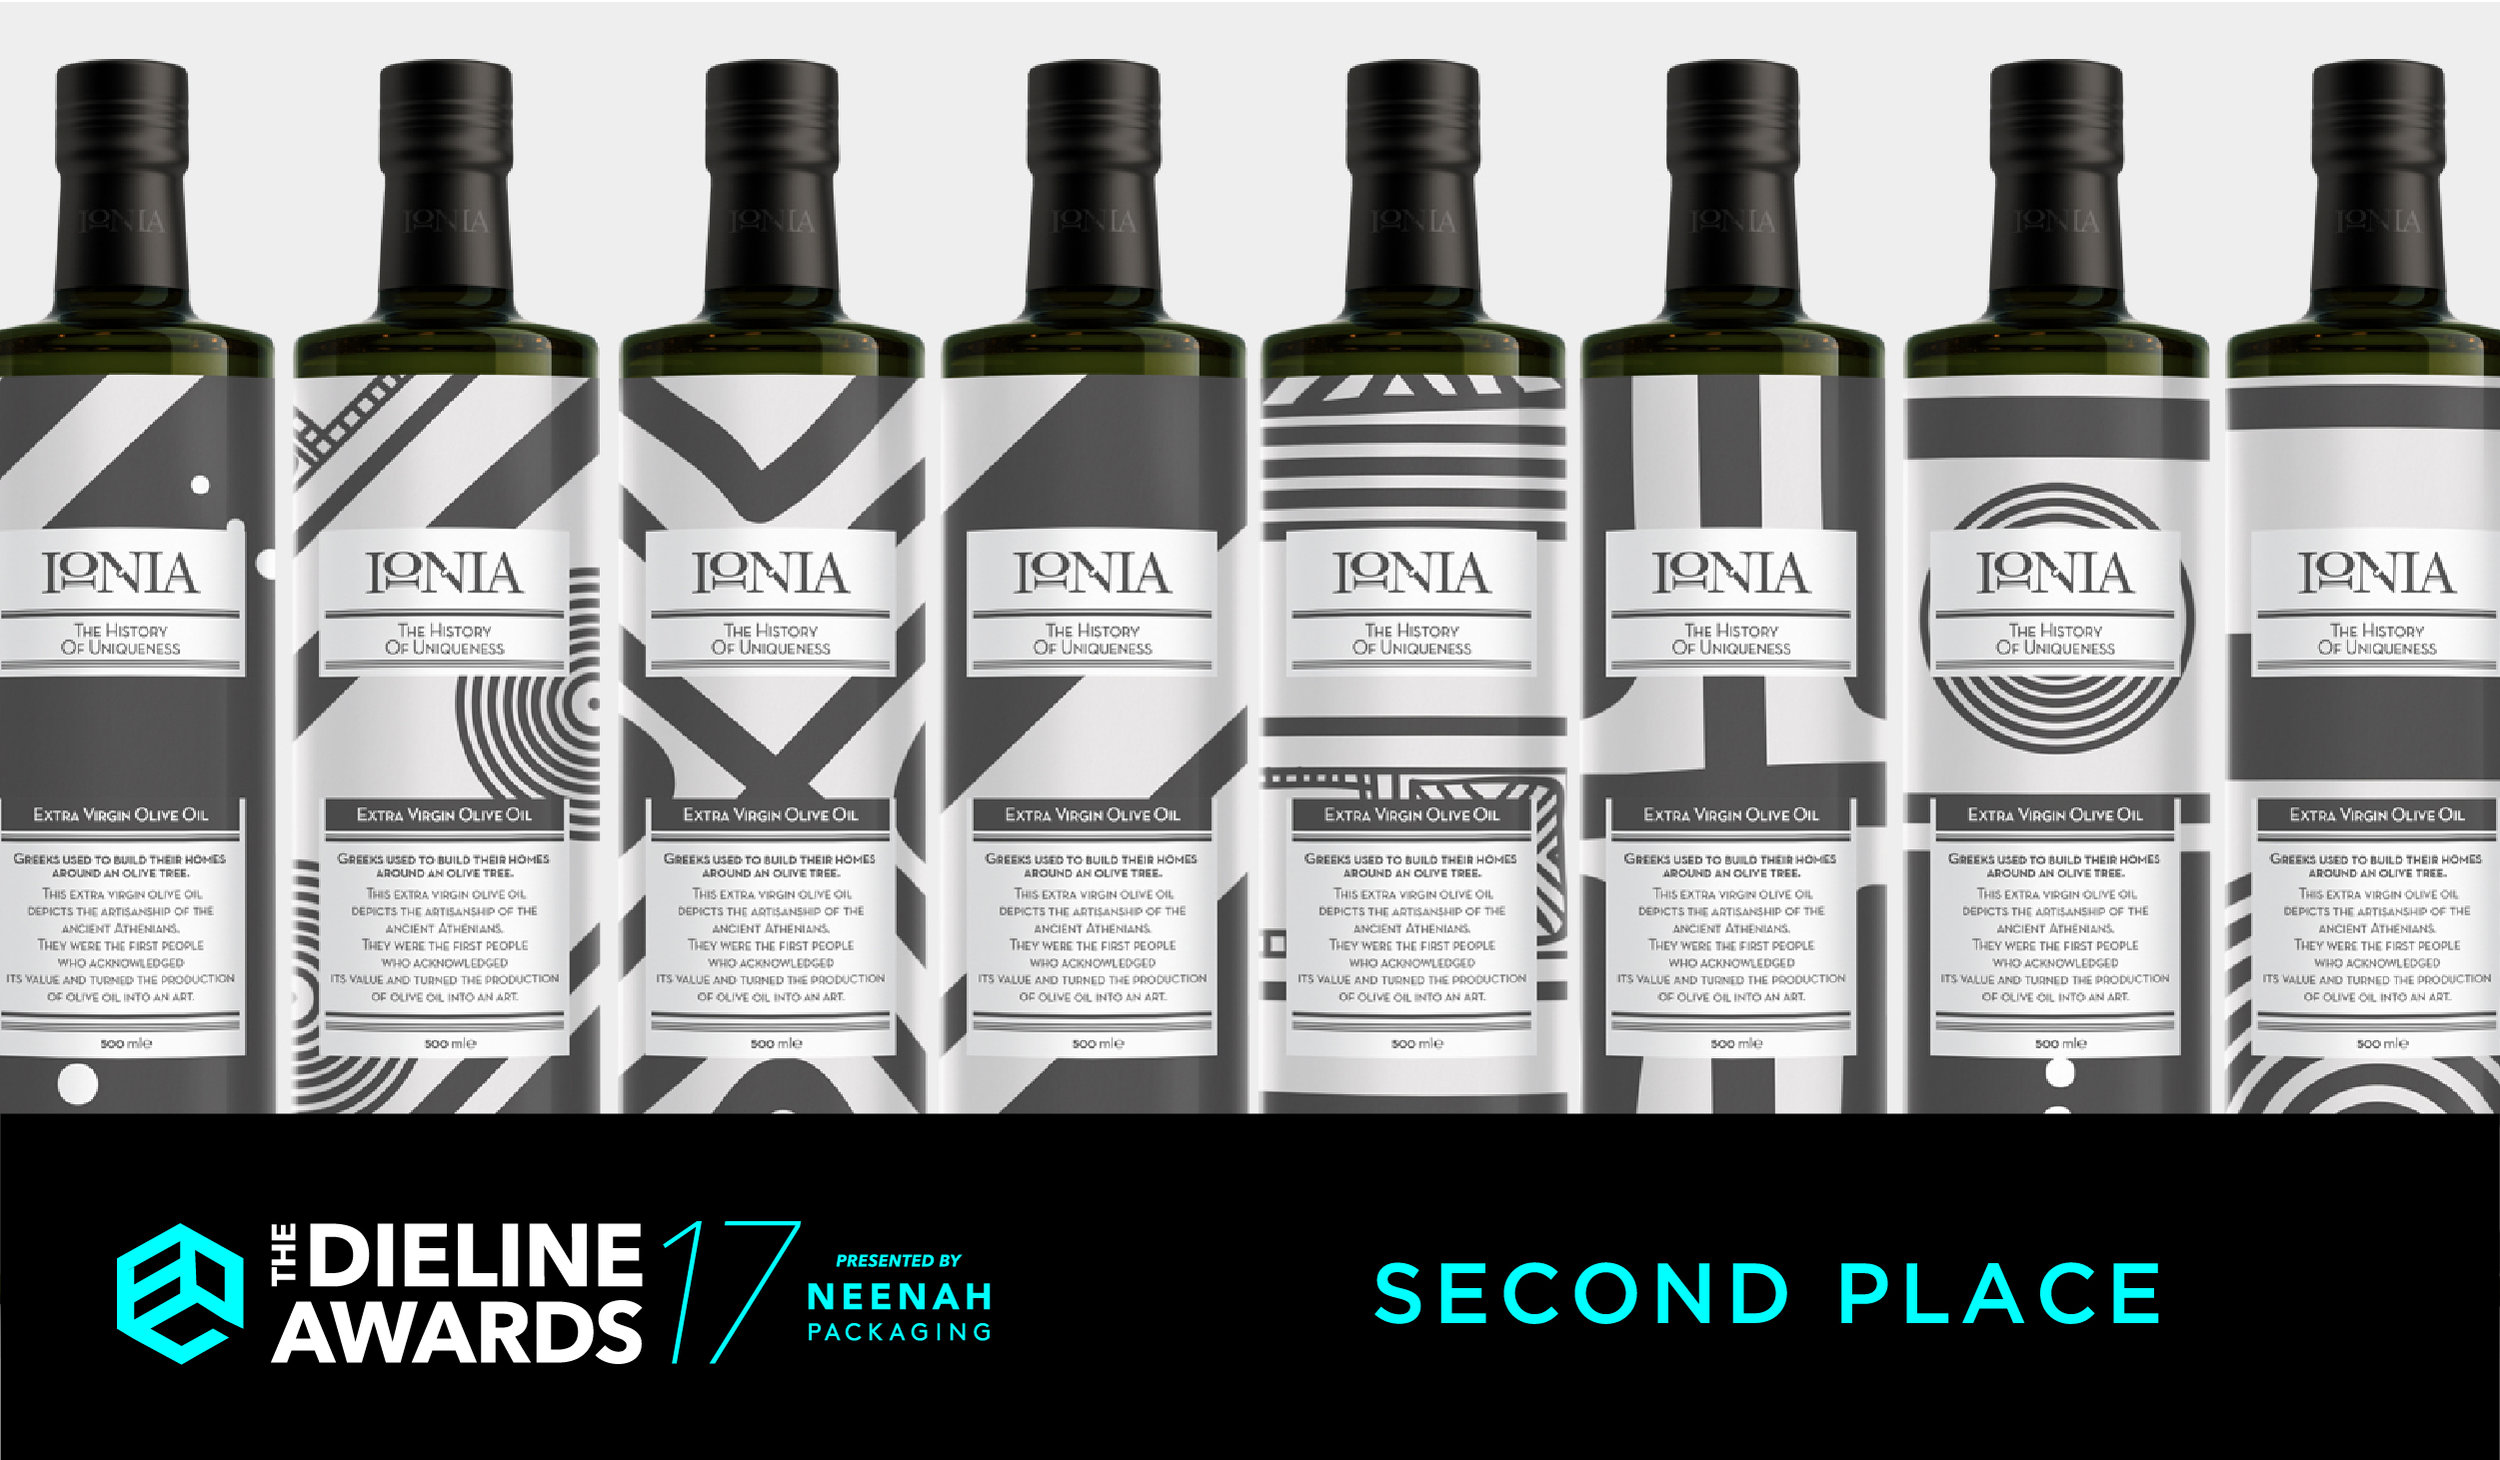 The Dieline Awards 2017: IONIA Limited Edition